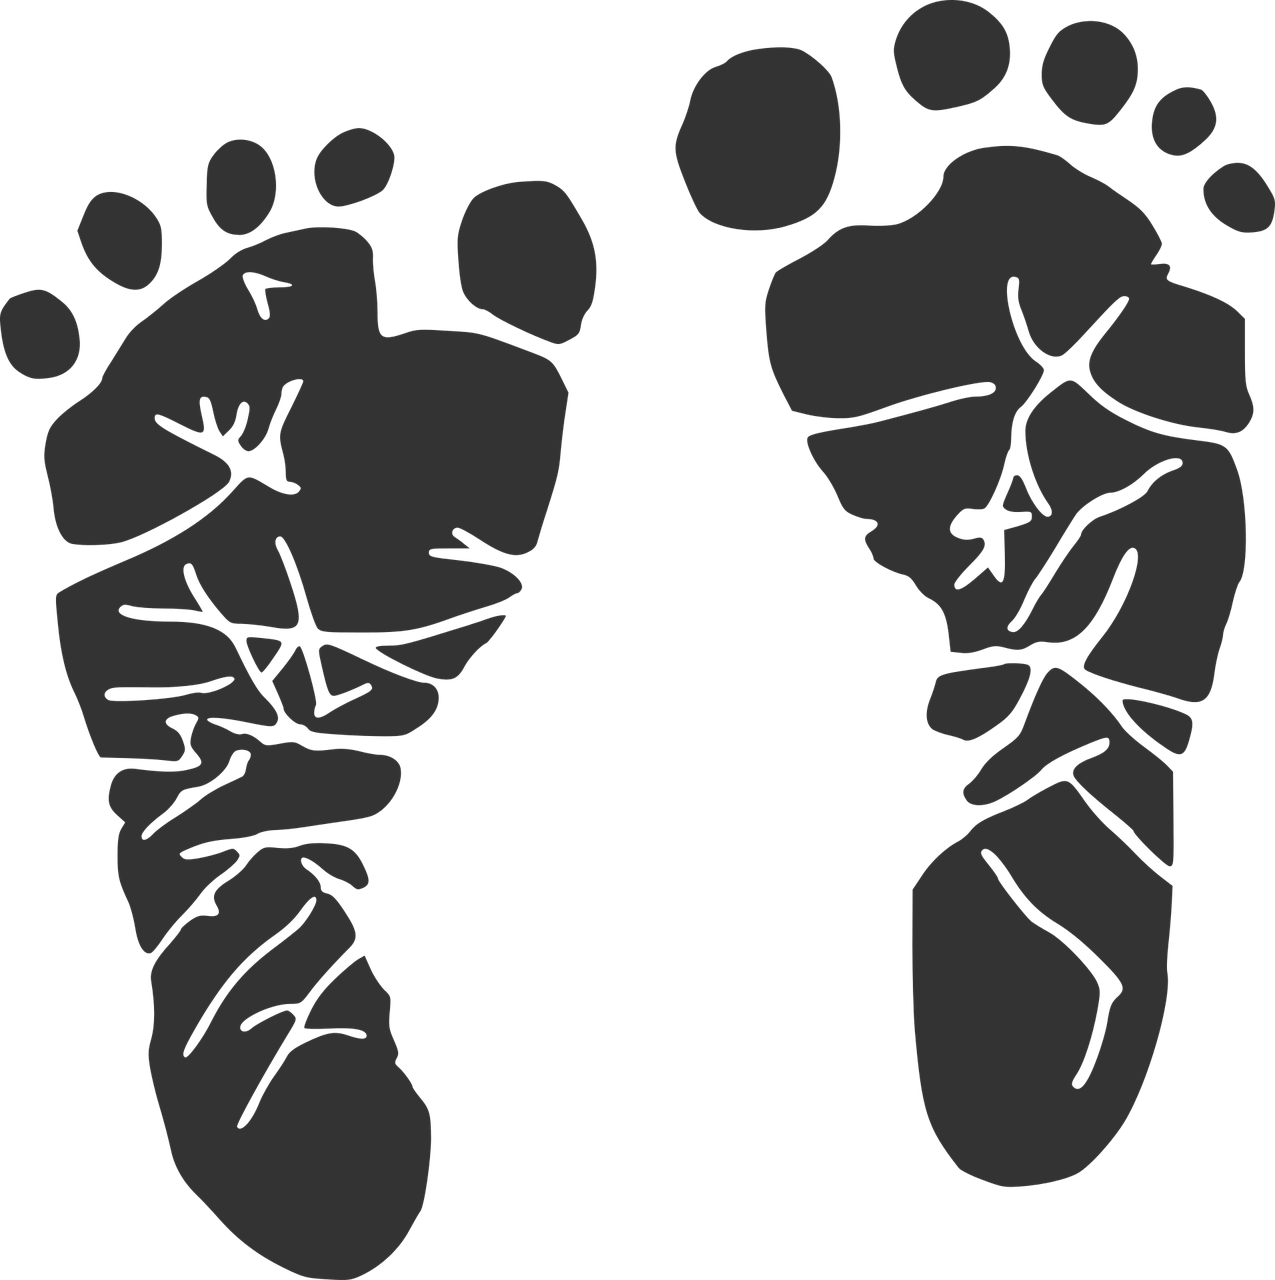 Footprint Silhouette Graphic PNG